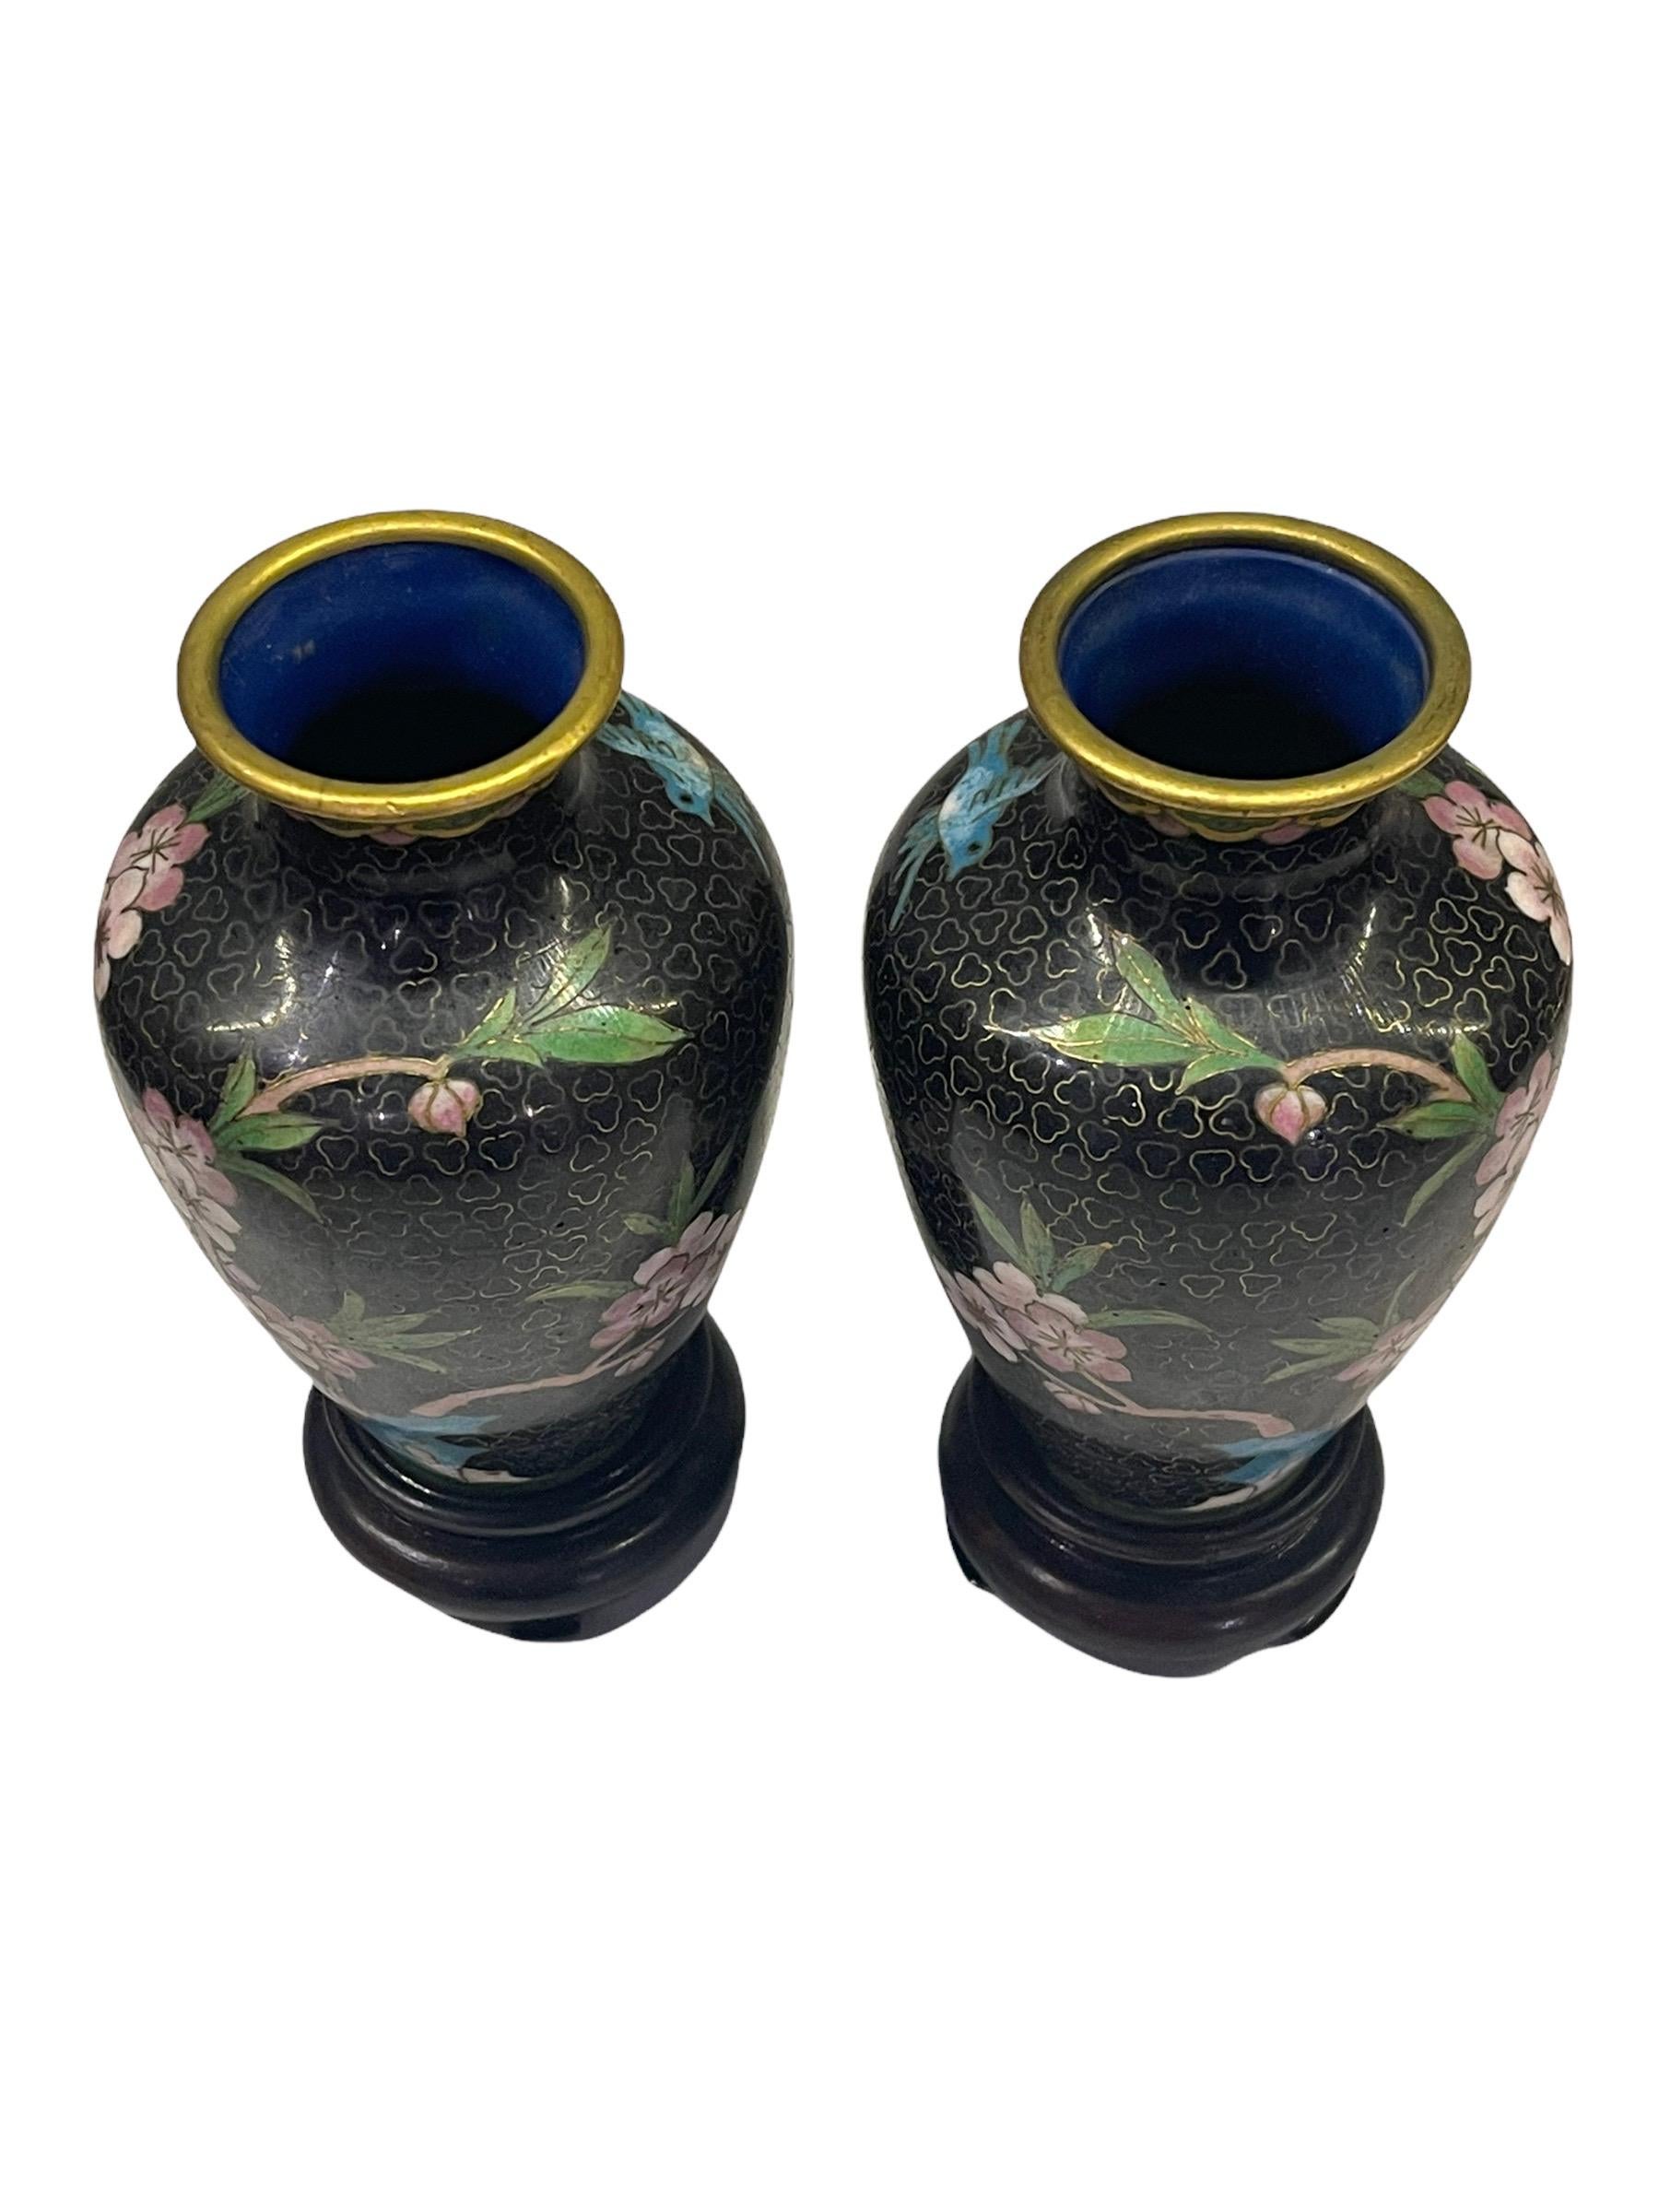 A pair of early 20th Century (Republic Period) Chinese urn vases created in the traditional cloisonne method. The miniature vases features brass metal forms with a classic baluster shape. The surface has been exquisitely hand decorated in colored